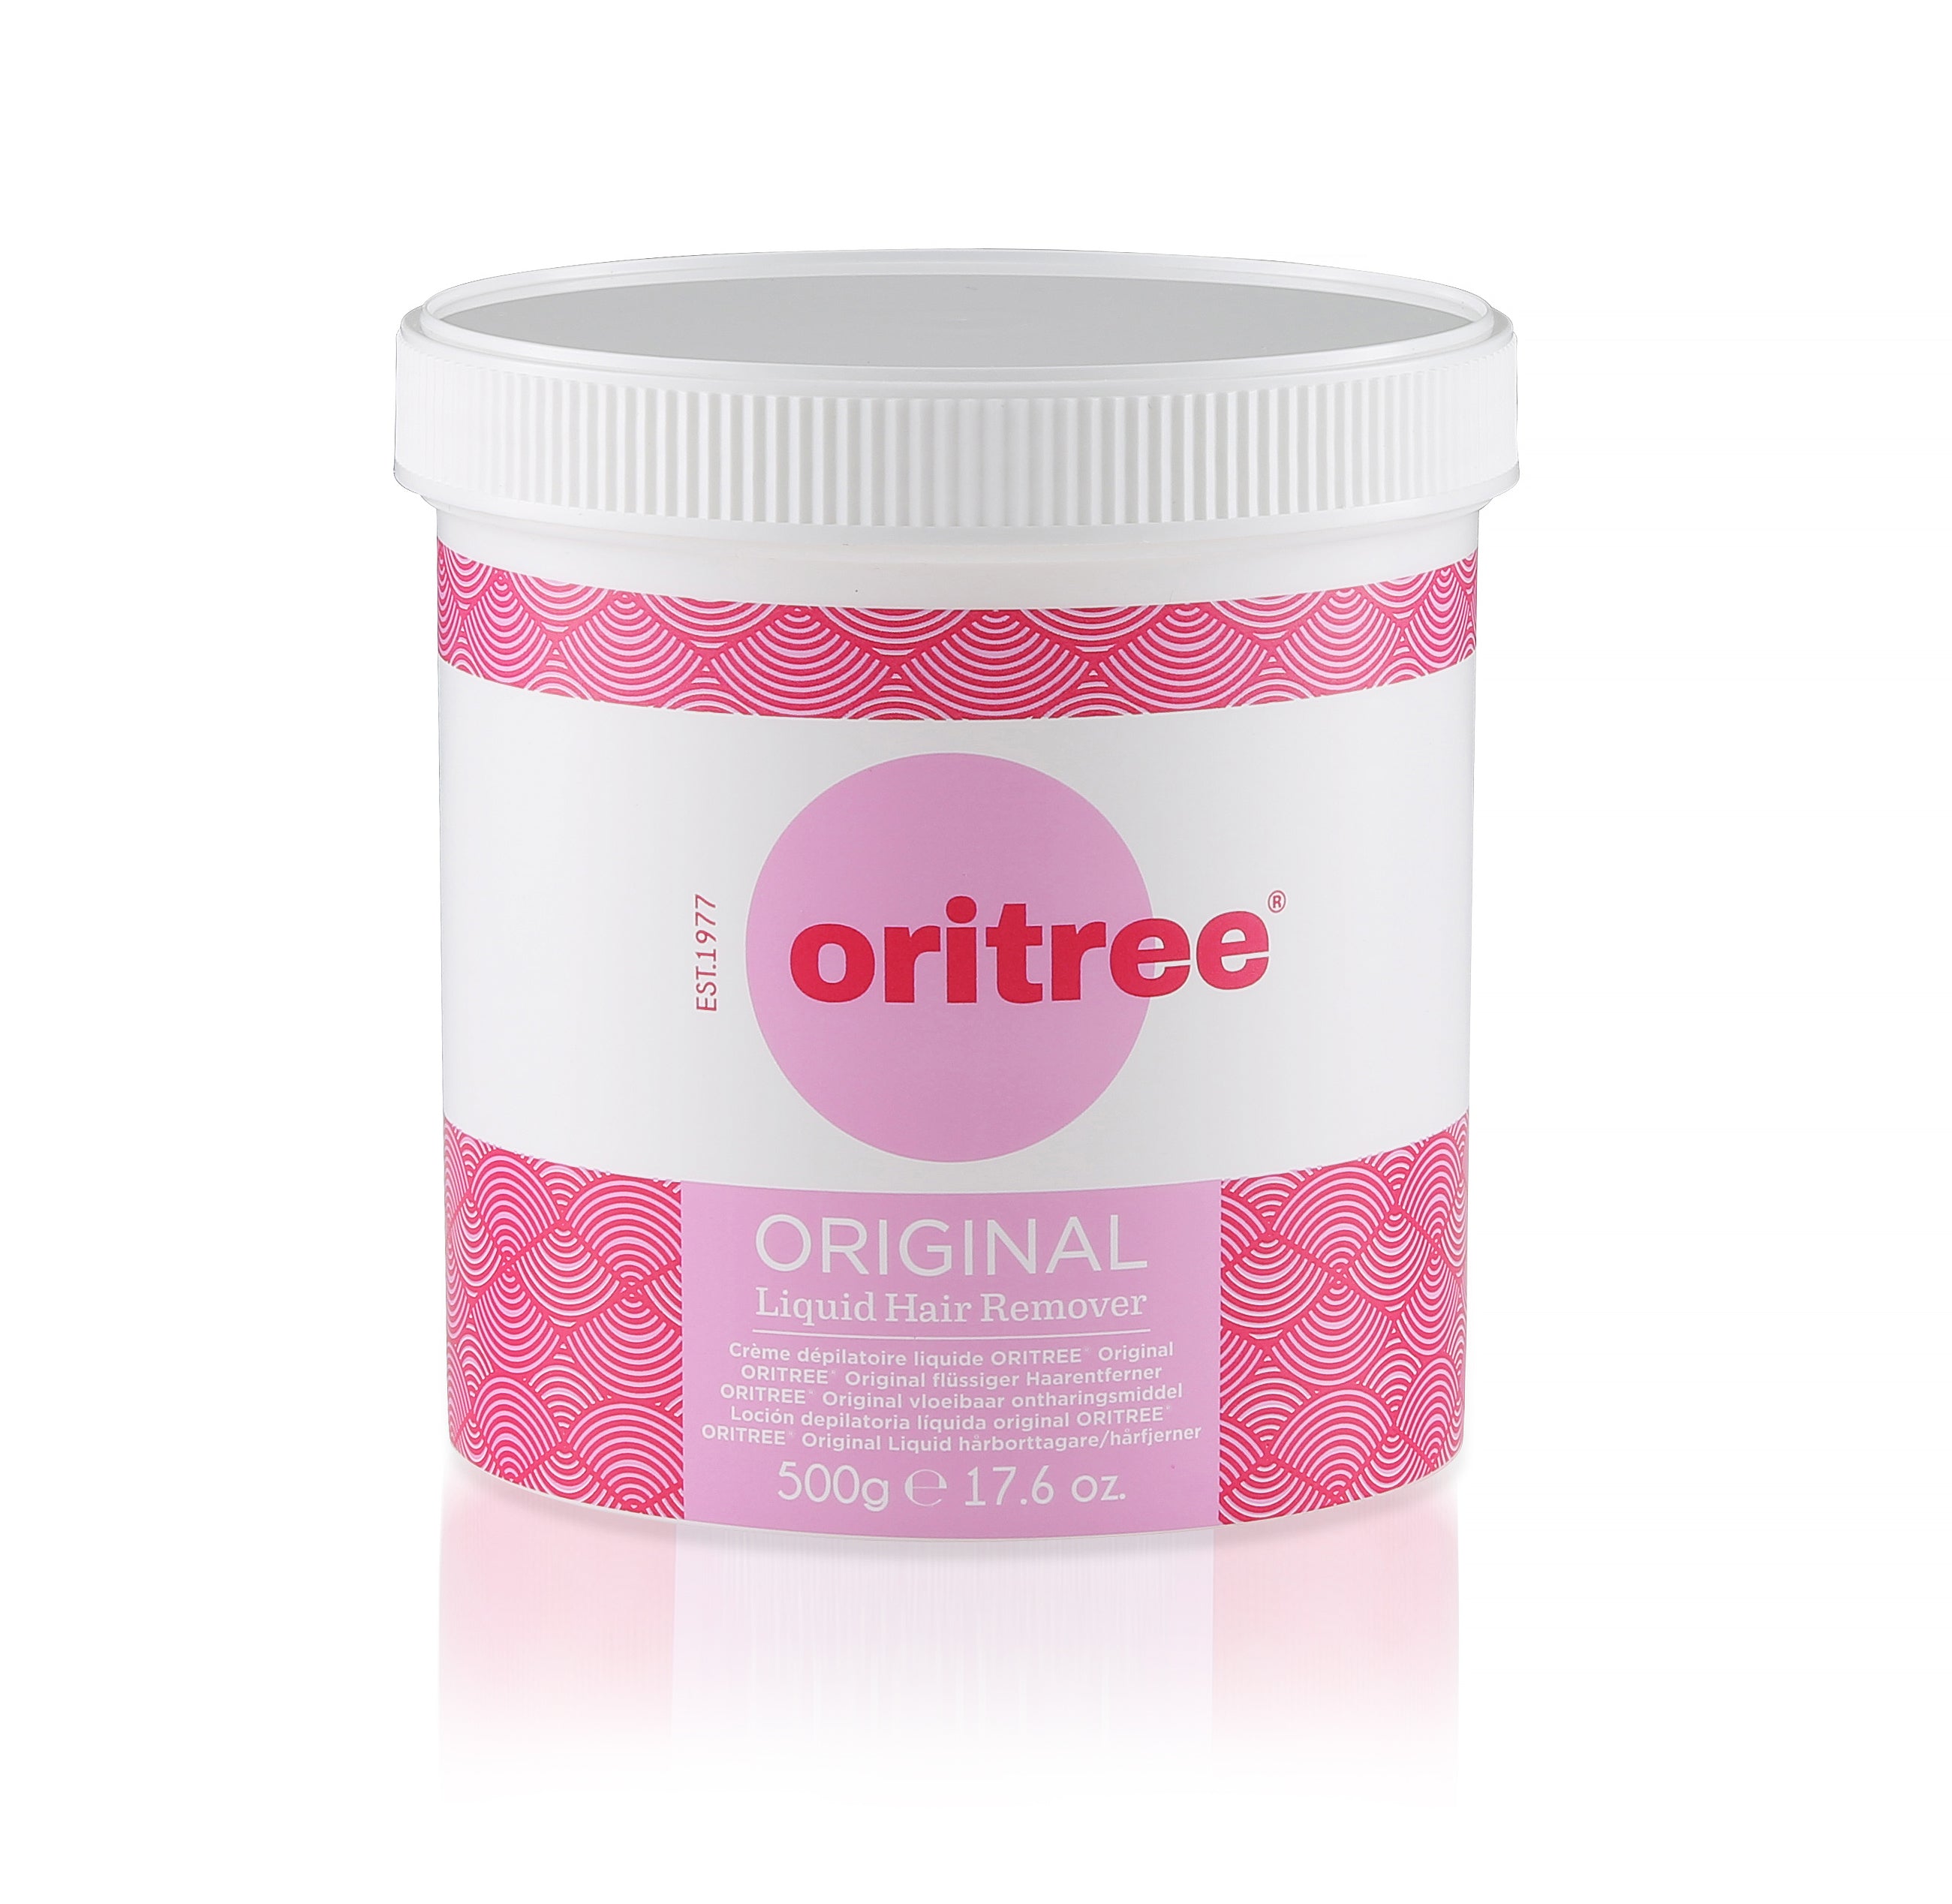 ORITREE Original Liquid Hair Remover 500G Hive - Ultimate Hair and Beauty